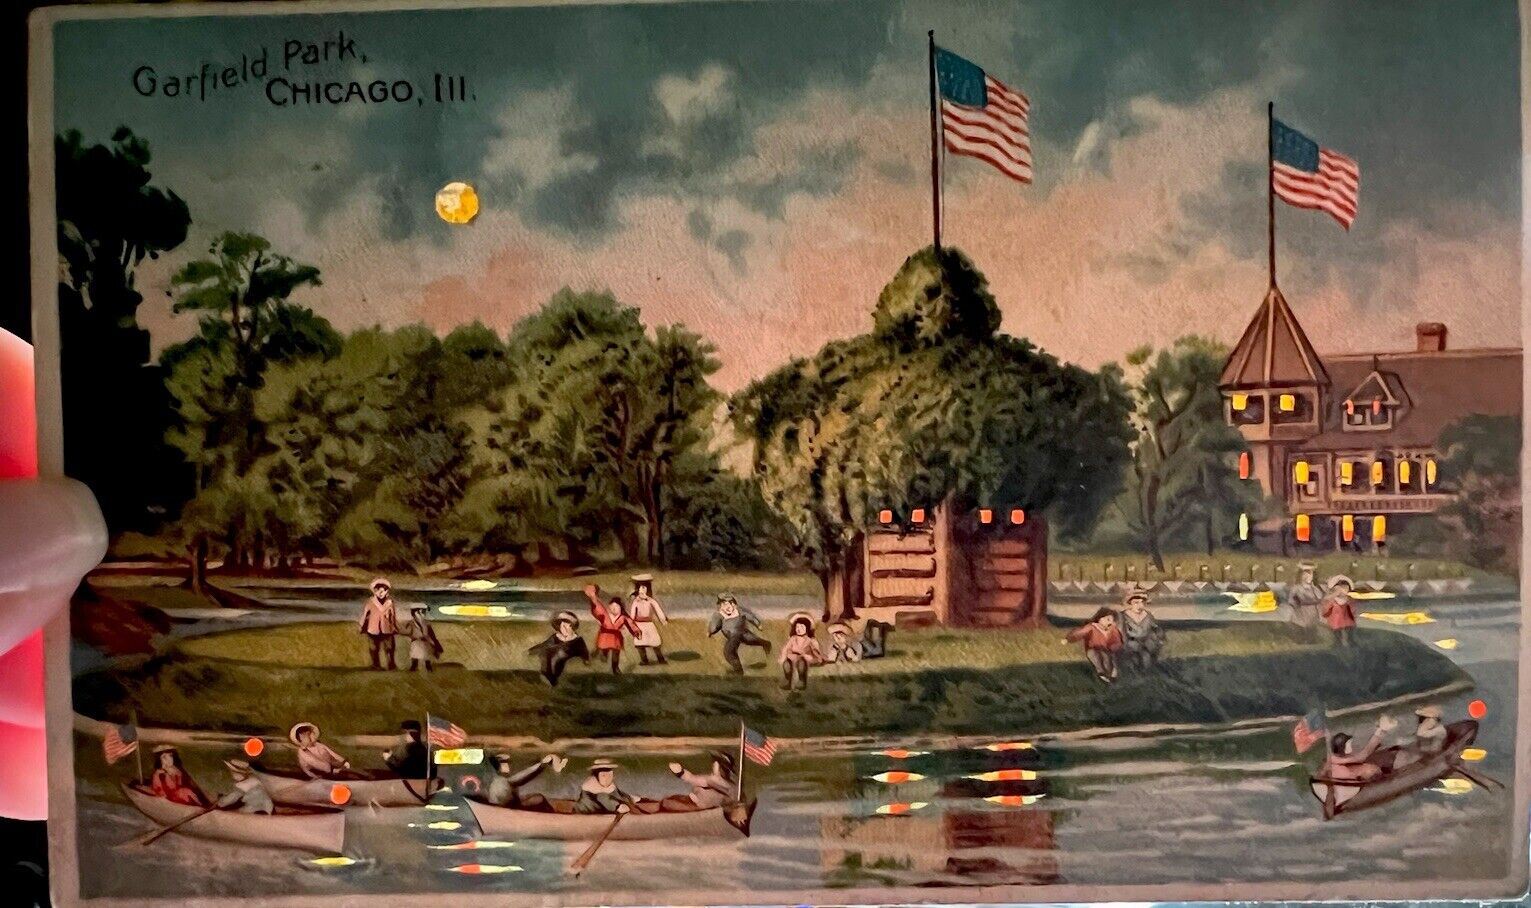 1914 HOLD to LIGHT antique POSTCARD Chicago Illinois GARFIELD PARK American Flag